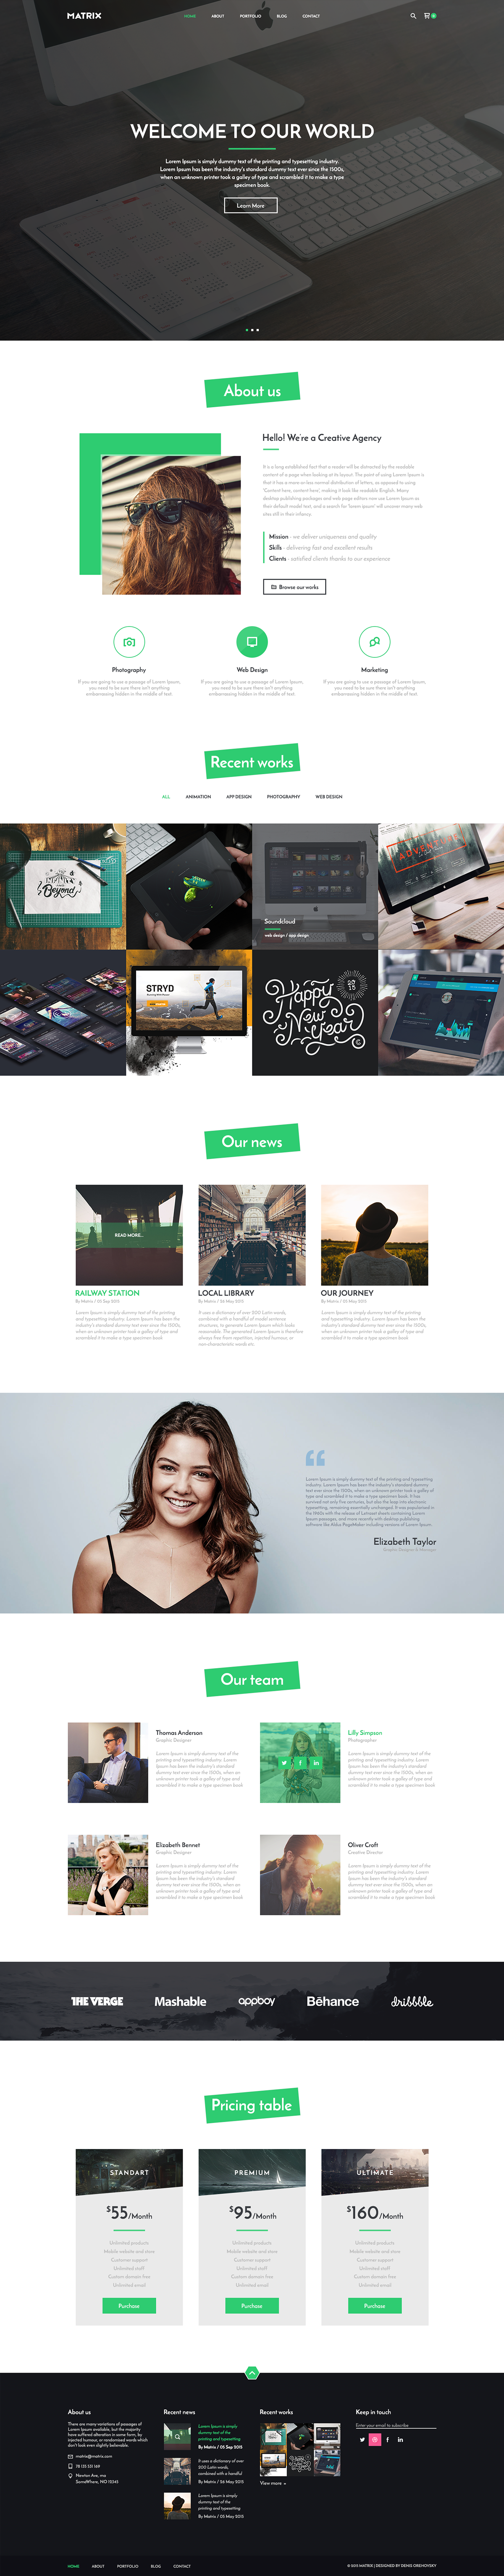 Matrix: Single-page Minimal Web PSD Template  Bypeople Regarding Free Psd Website Templates For Business